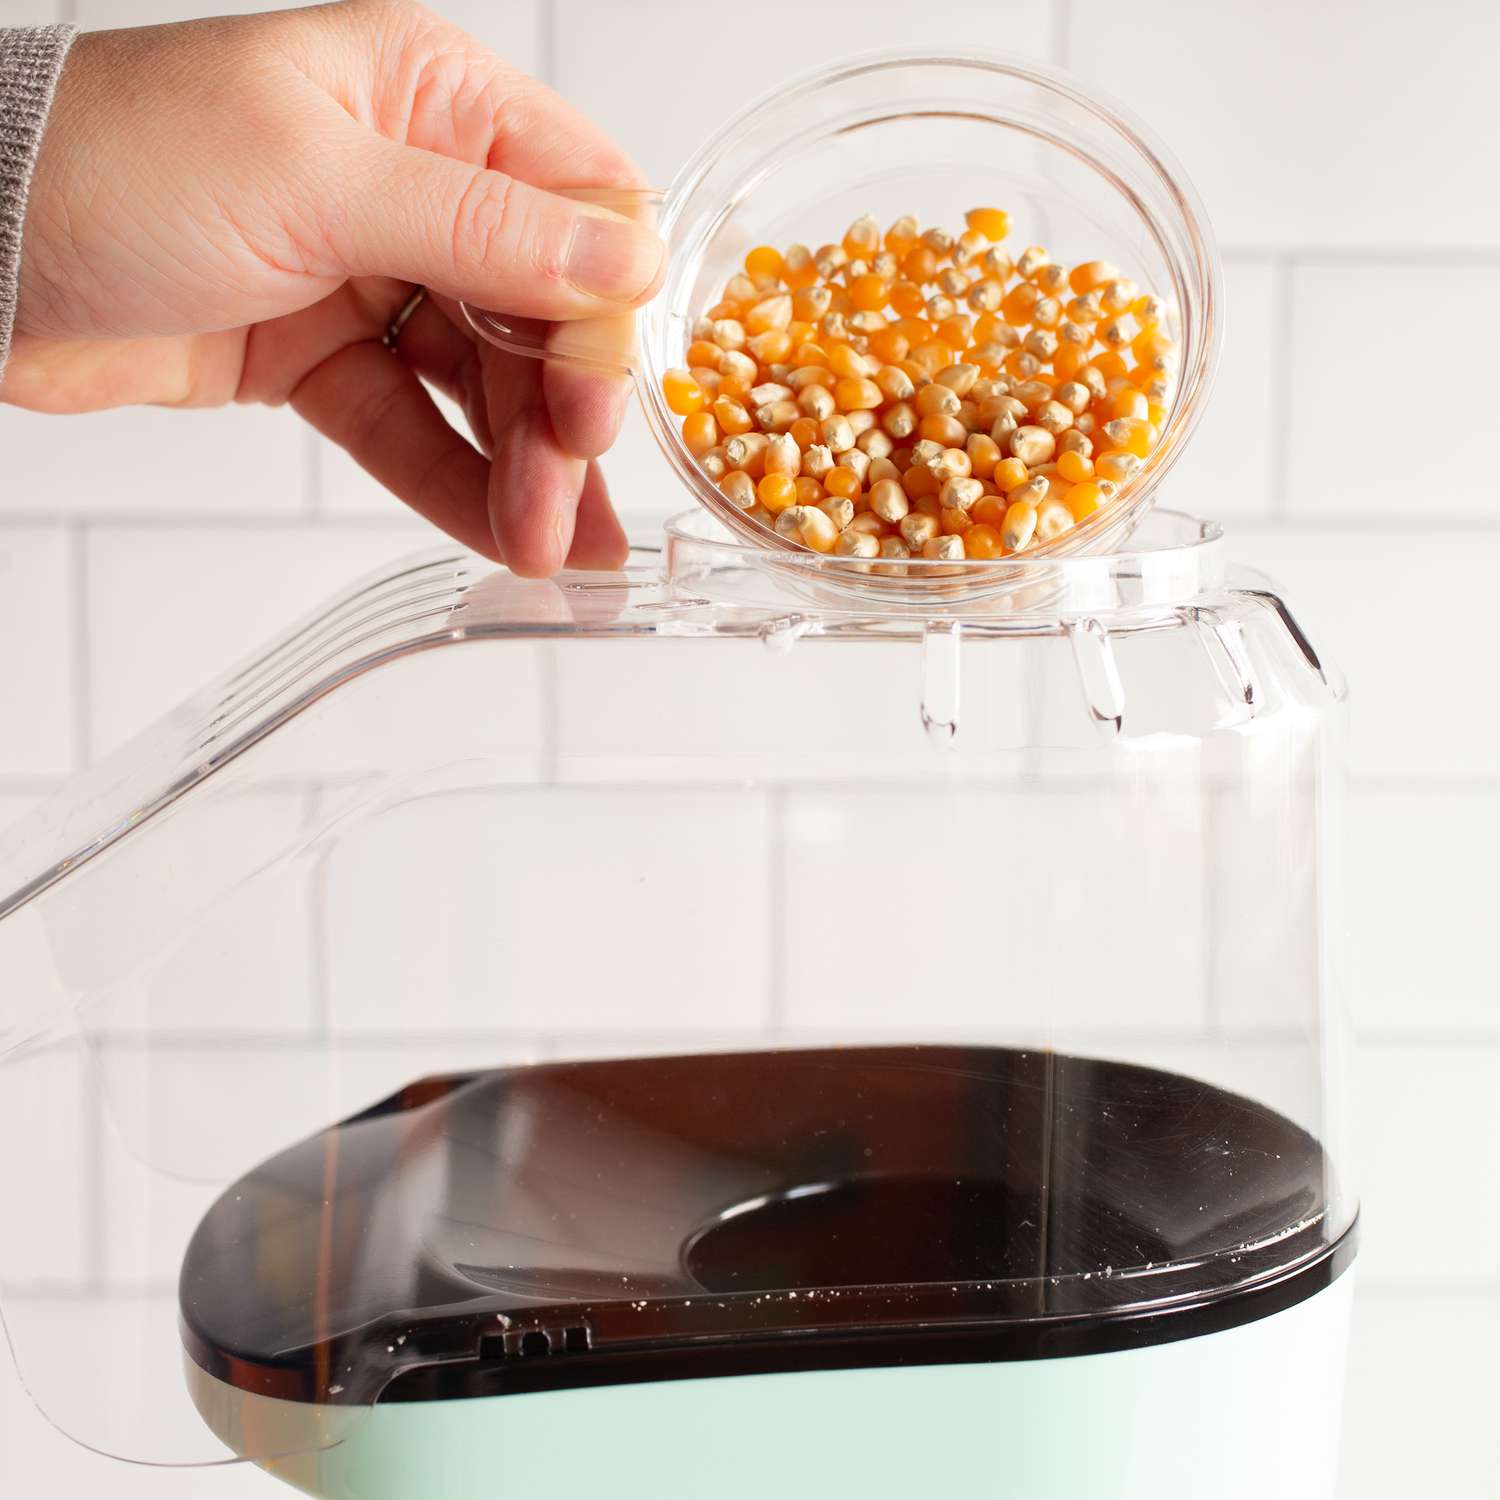 A close up of a hand pouring popcorn kernels into an air popper